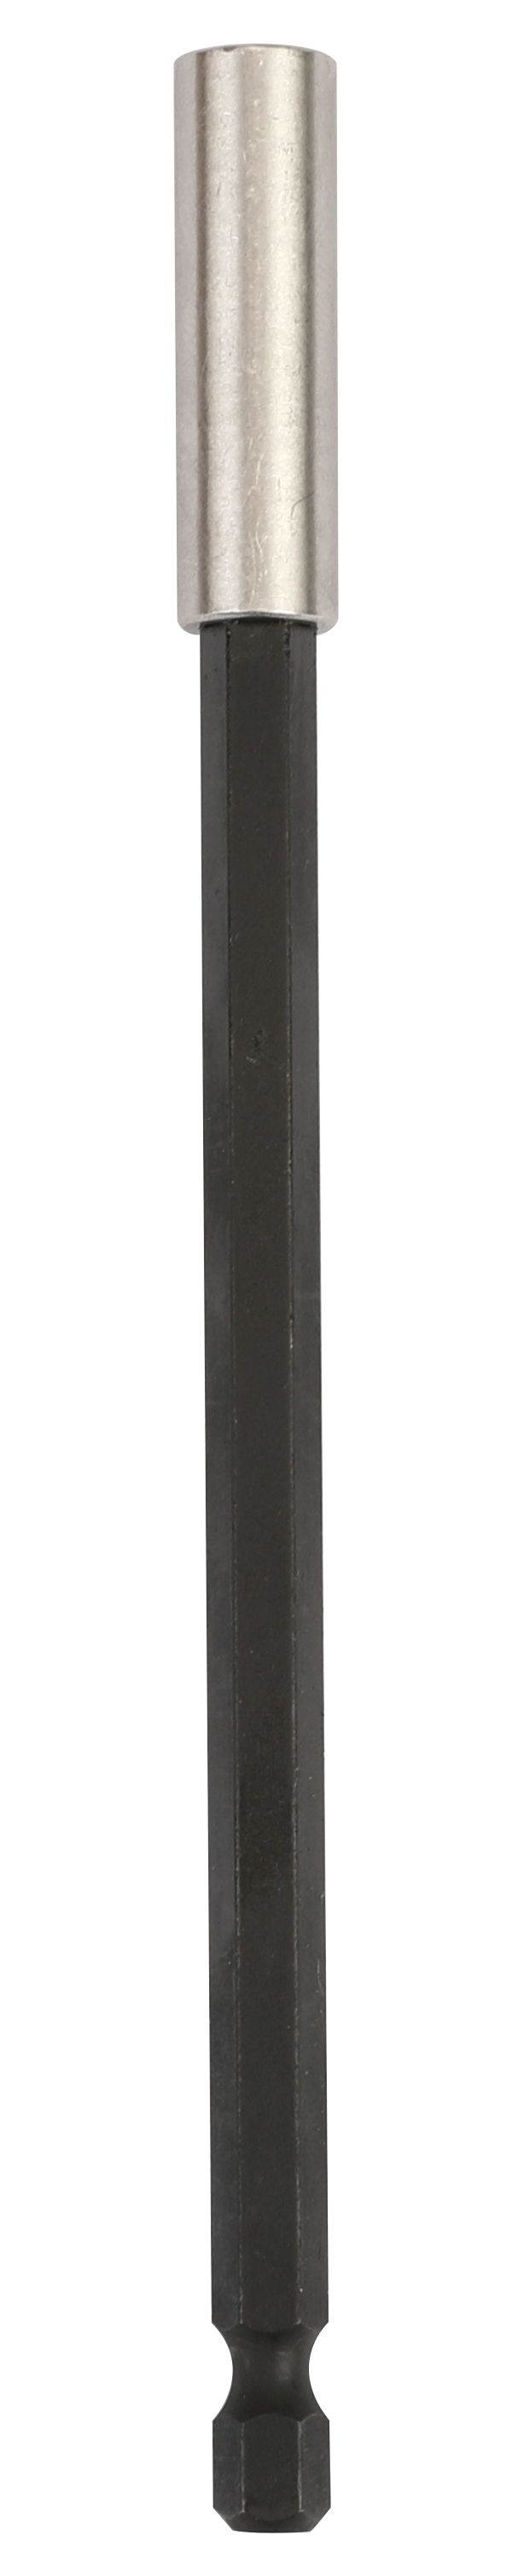 Image of Wickes Magnetic Screwdriver Bit Holder 150mm